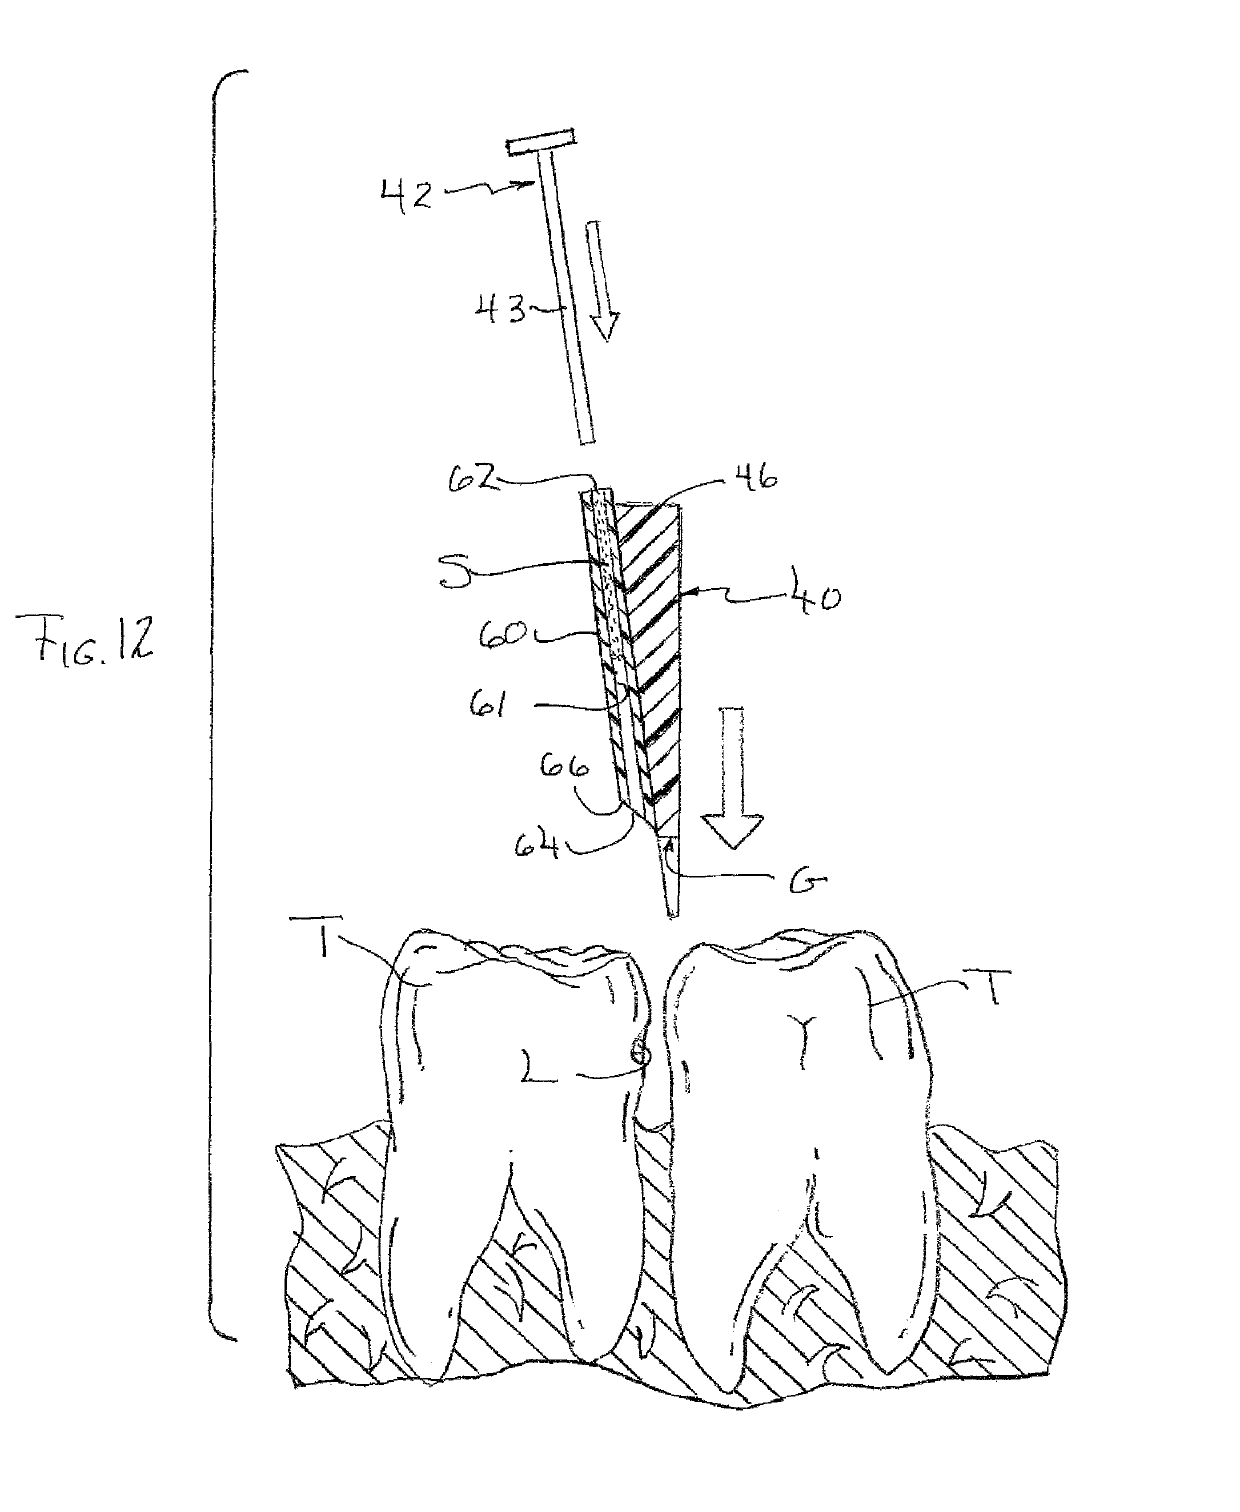 Wedge device for facilitating treatment of interproximal dental caries, and method of use